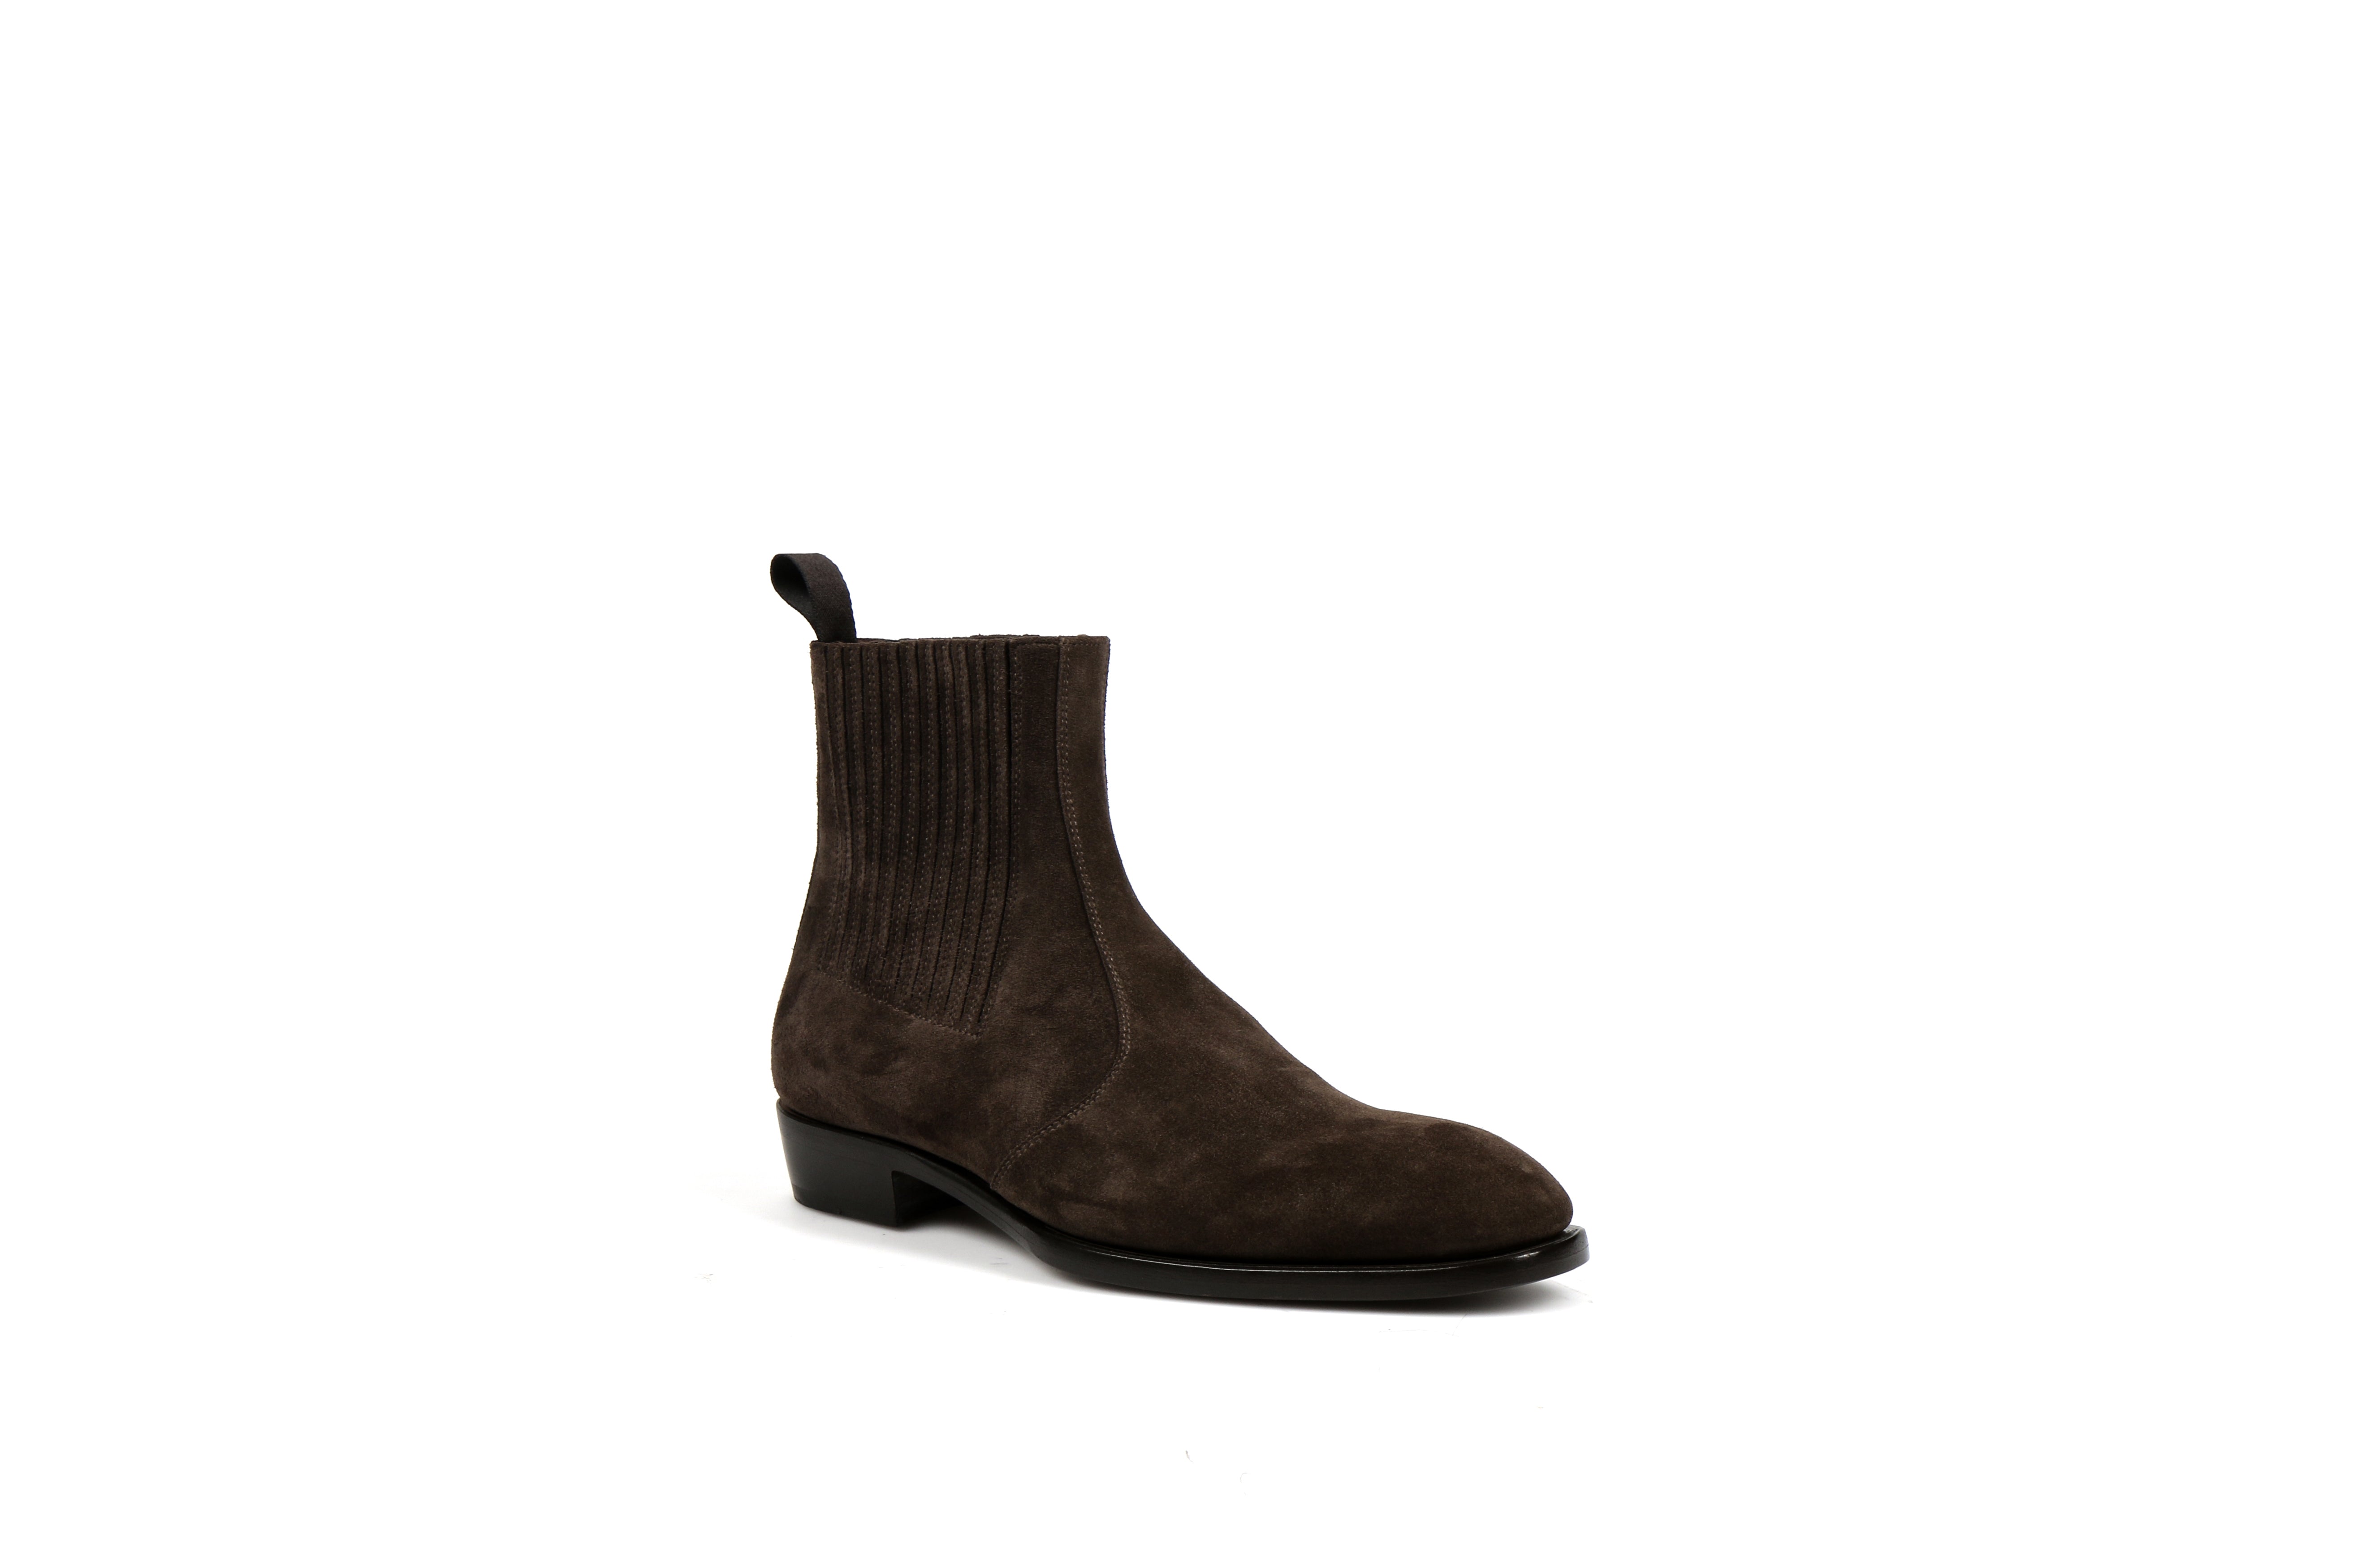 Jay Coffee Suede Leather Zipper Boots